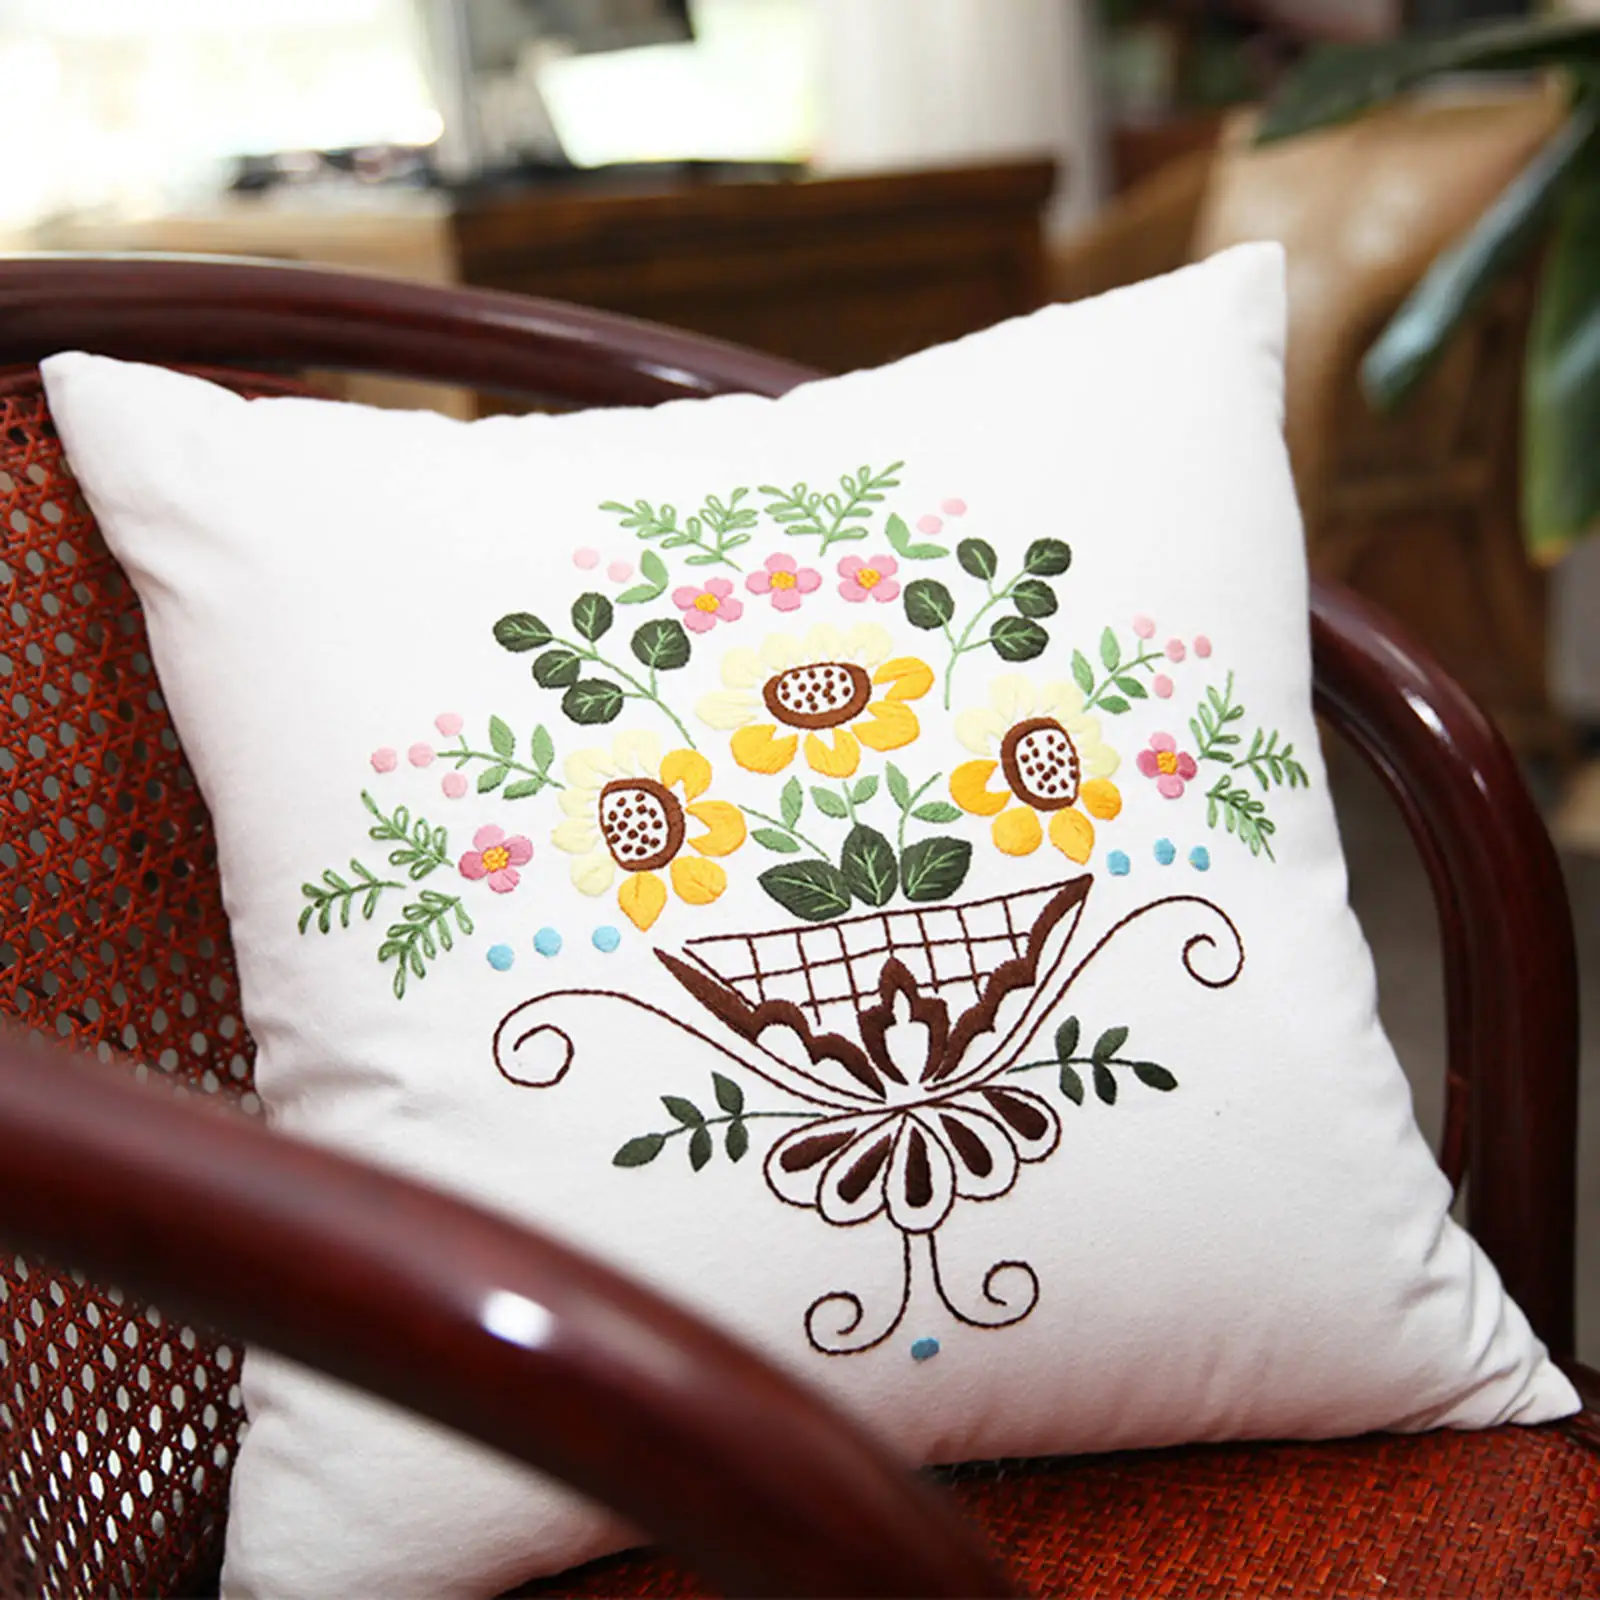 DIY Embroidery Pillow Covers Kit Colorful Threads Cross Stitch Kits for Sewing Supplies Sofa